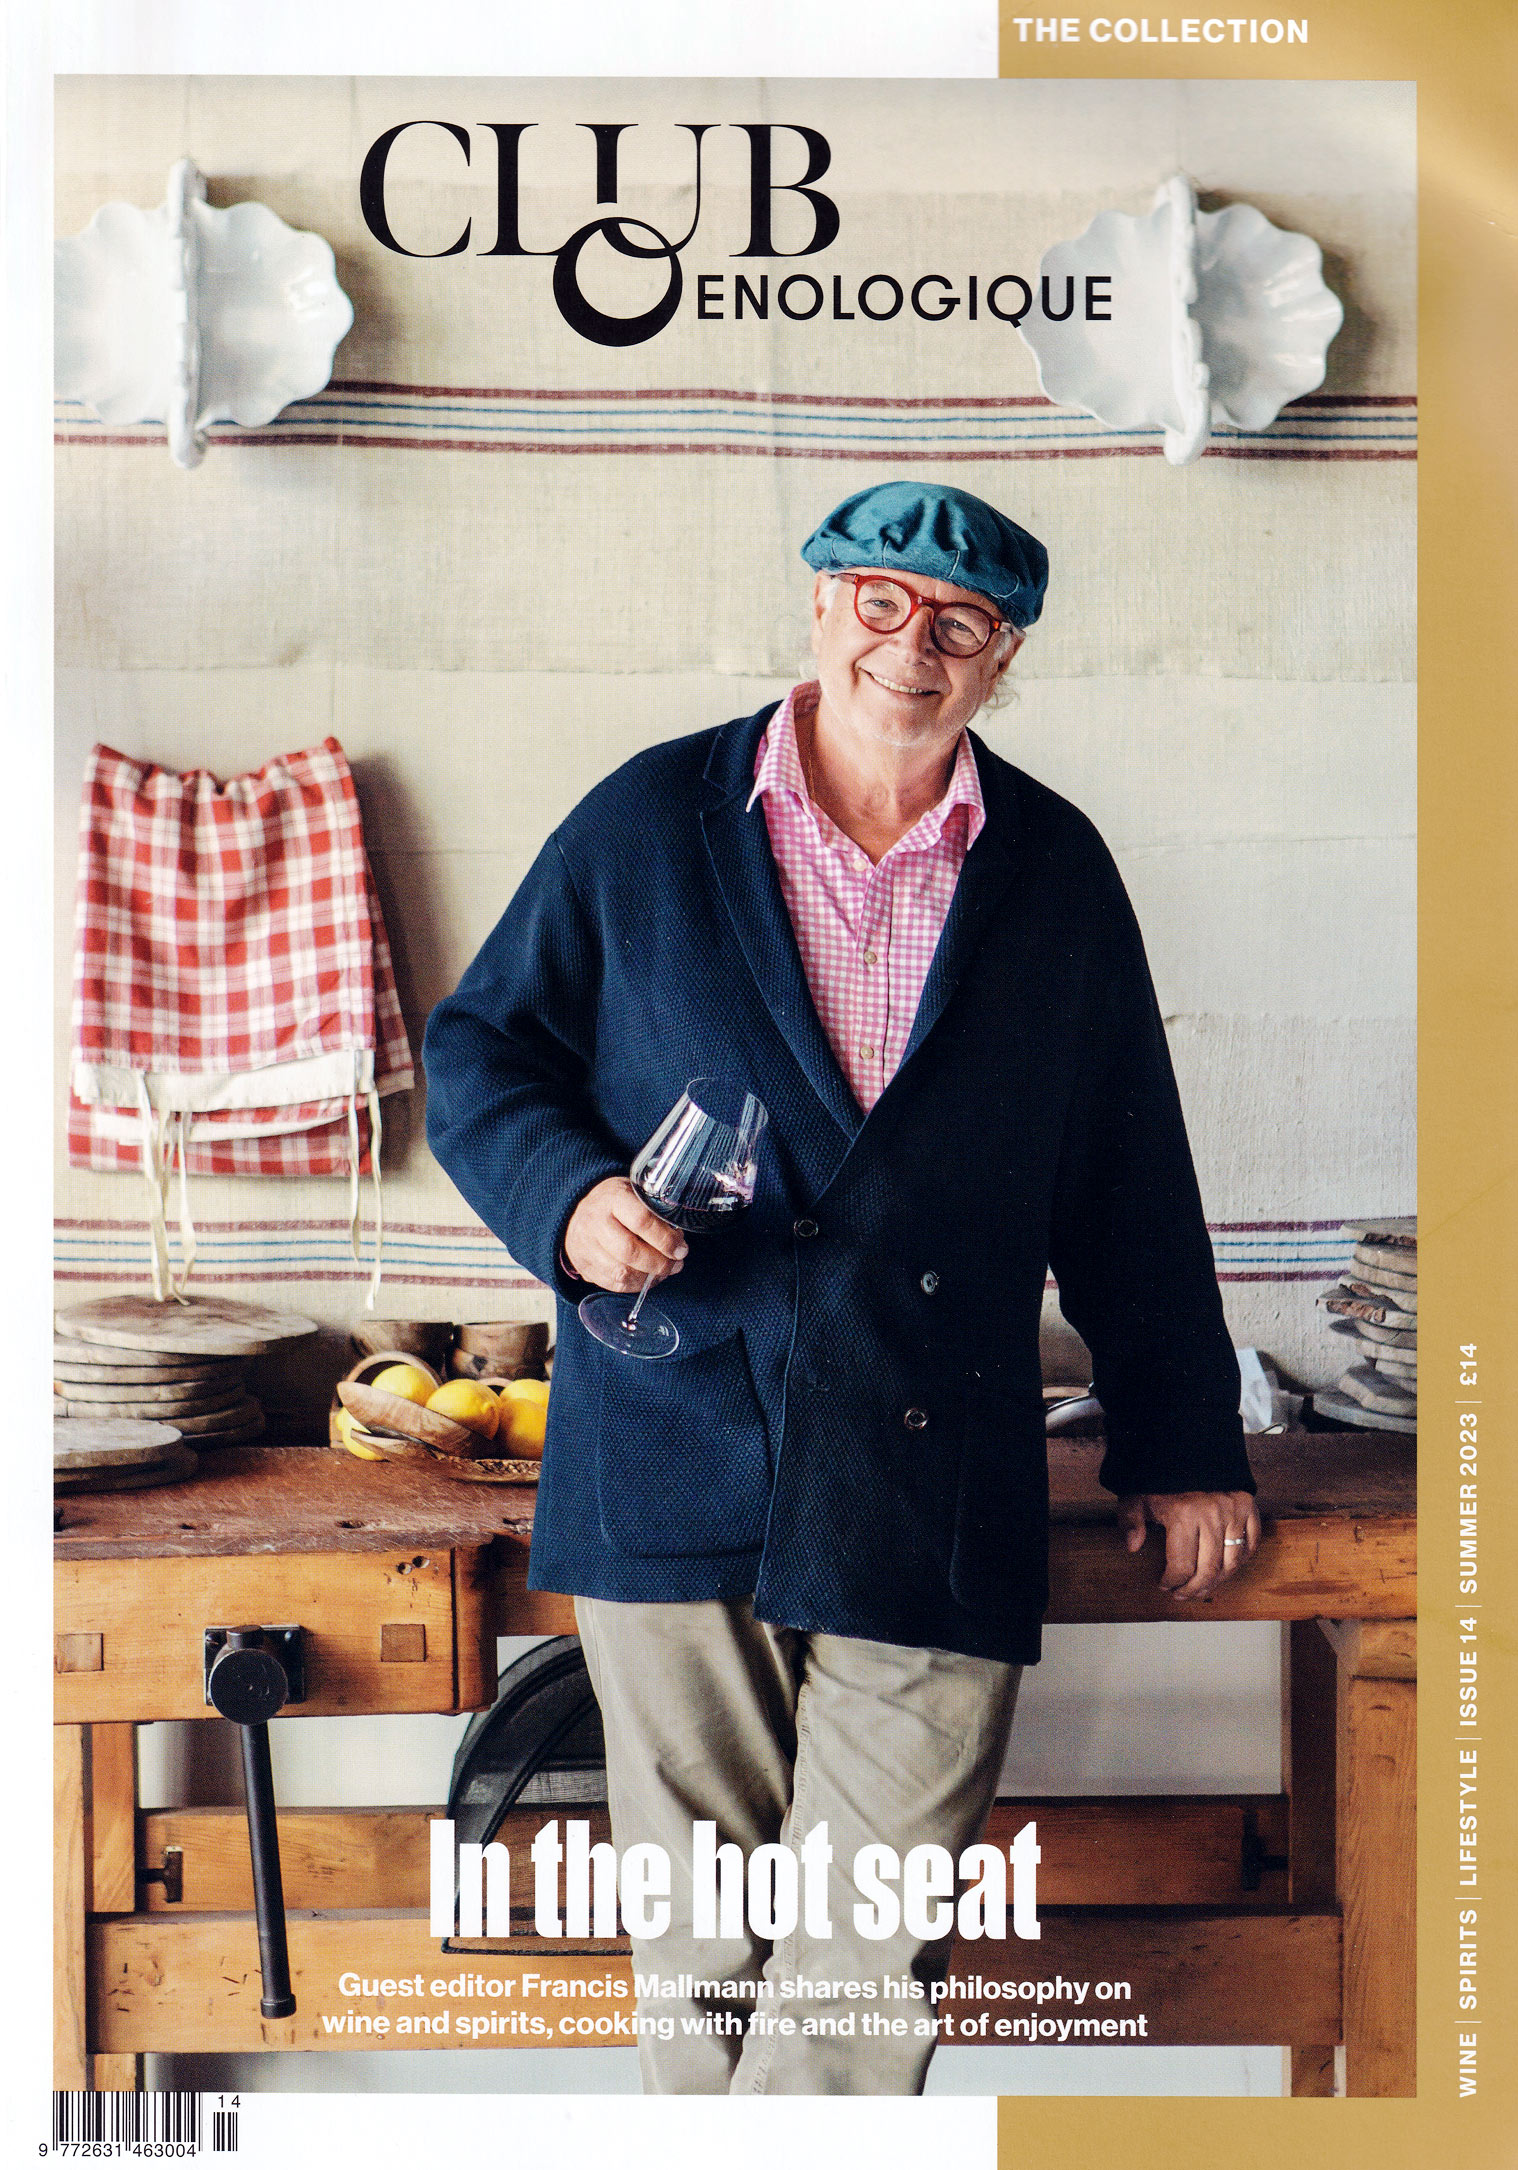 Cover of Club Oenologique magazine, showing a portrait of chef Francis Mallmann, leaning on a table